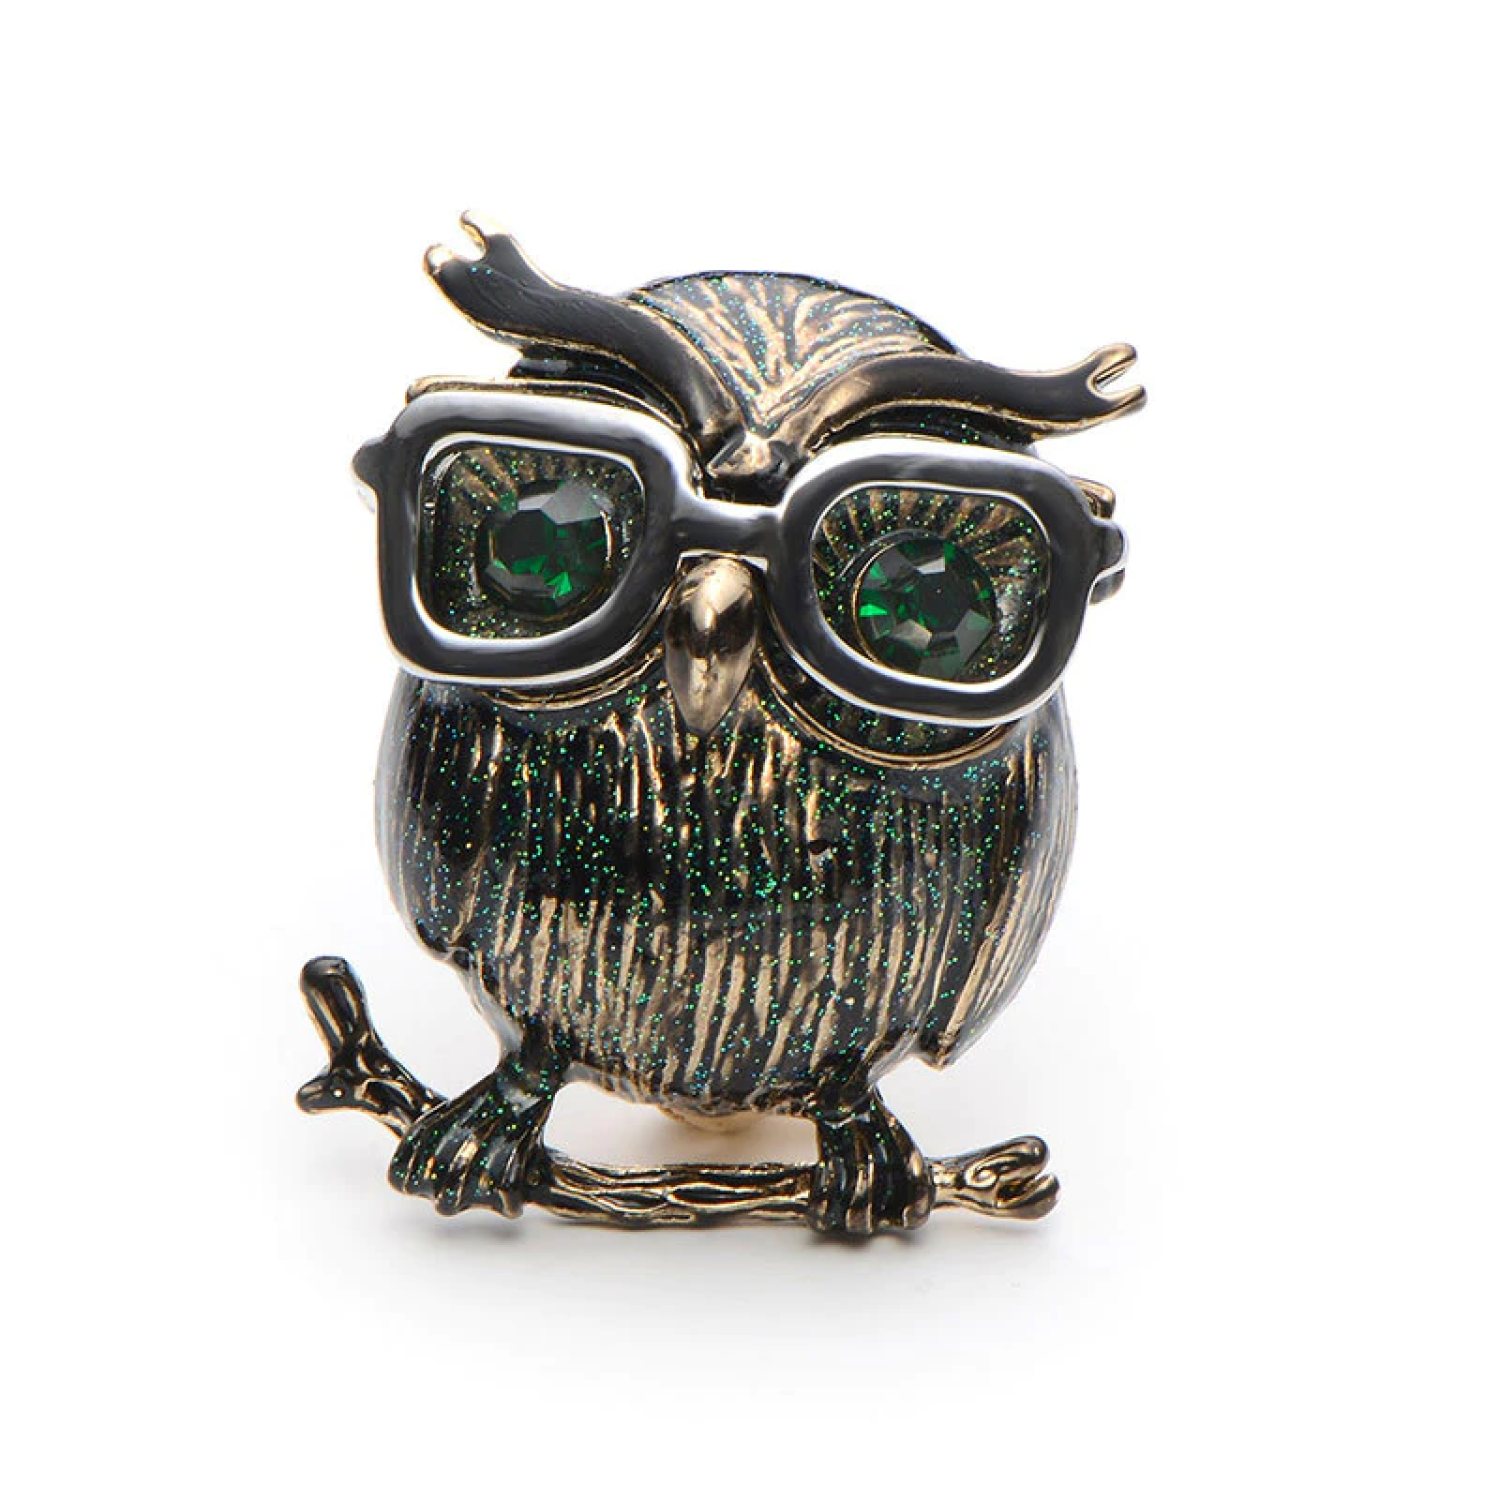 A Green Speckled Owl Shaped Lapel Pin